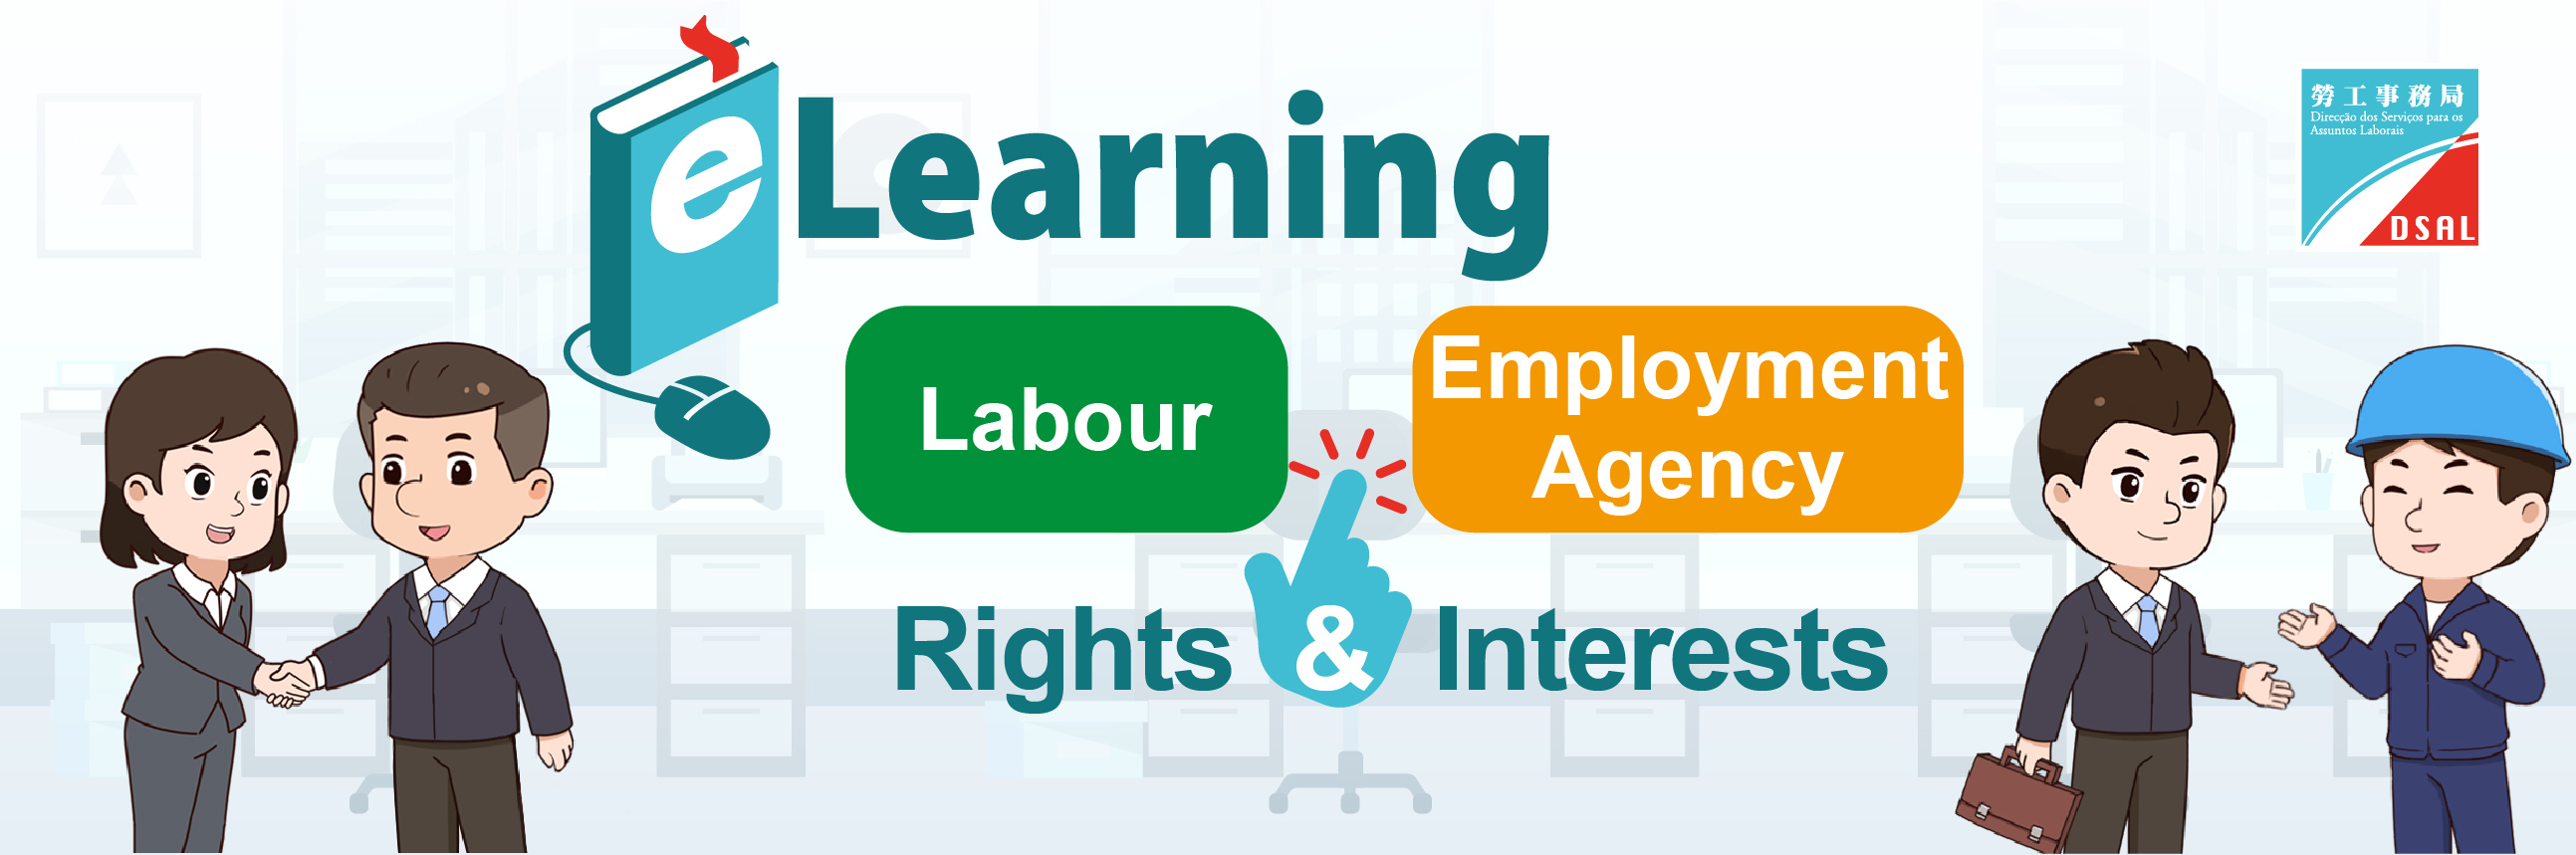 eLearning learn more about rights and interests